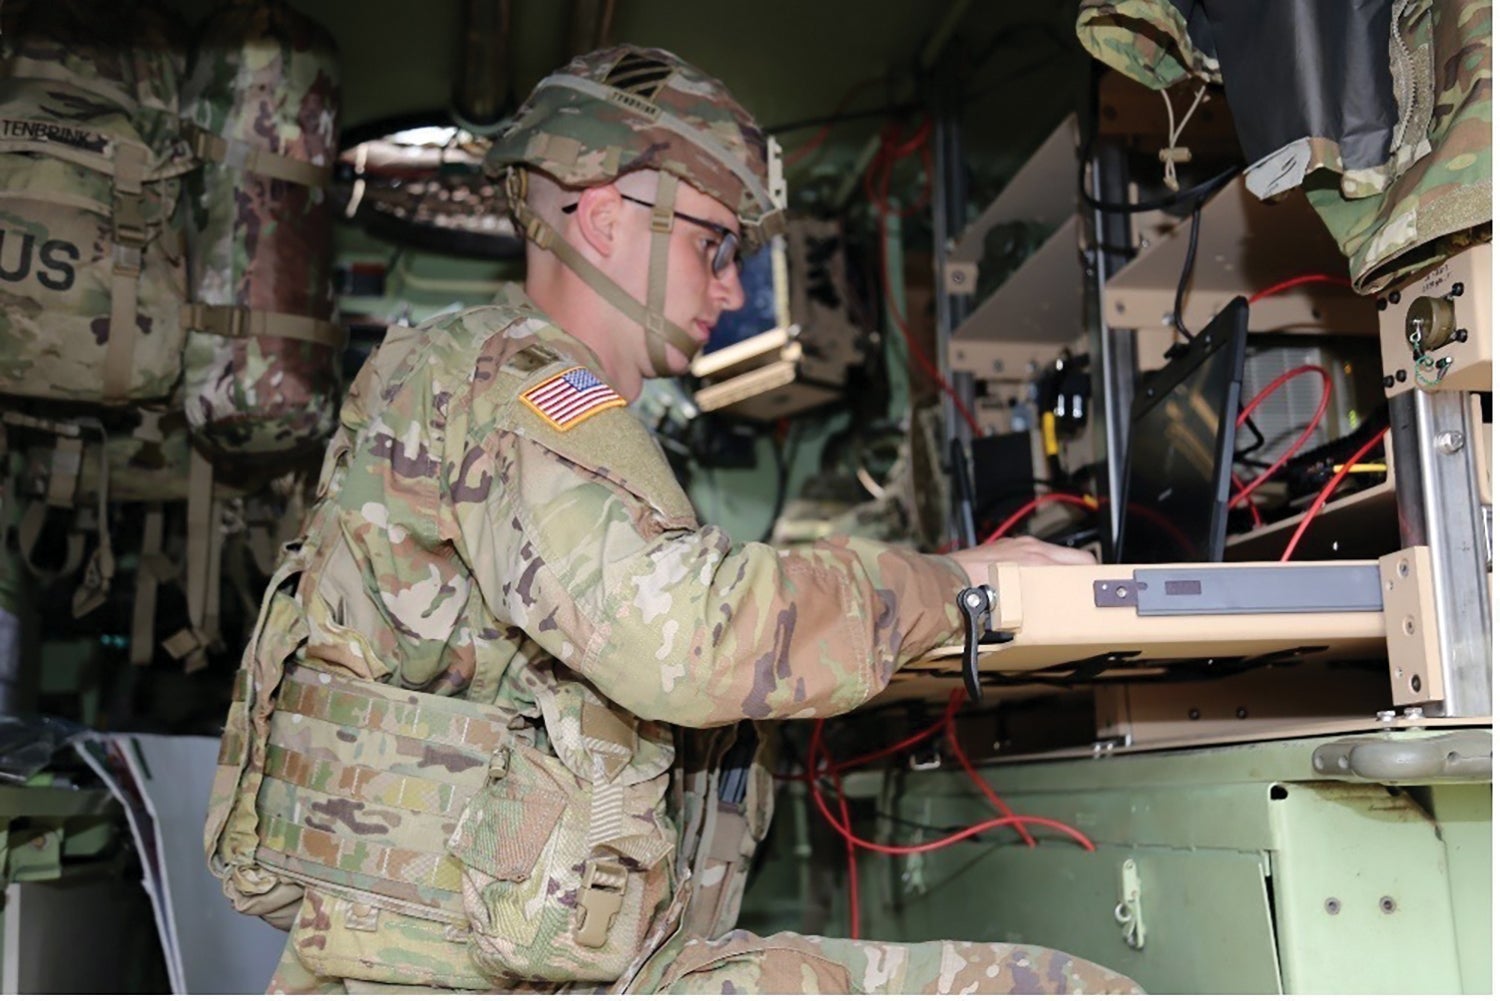 Spc. Elijah Tenbrink, an intelligence analyst, participates in a test of an updated Army network at Fort Stewart, Georgia. (Credit: U.S. Army/Amy Walker)